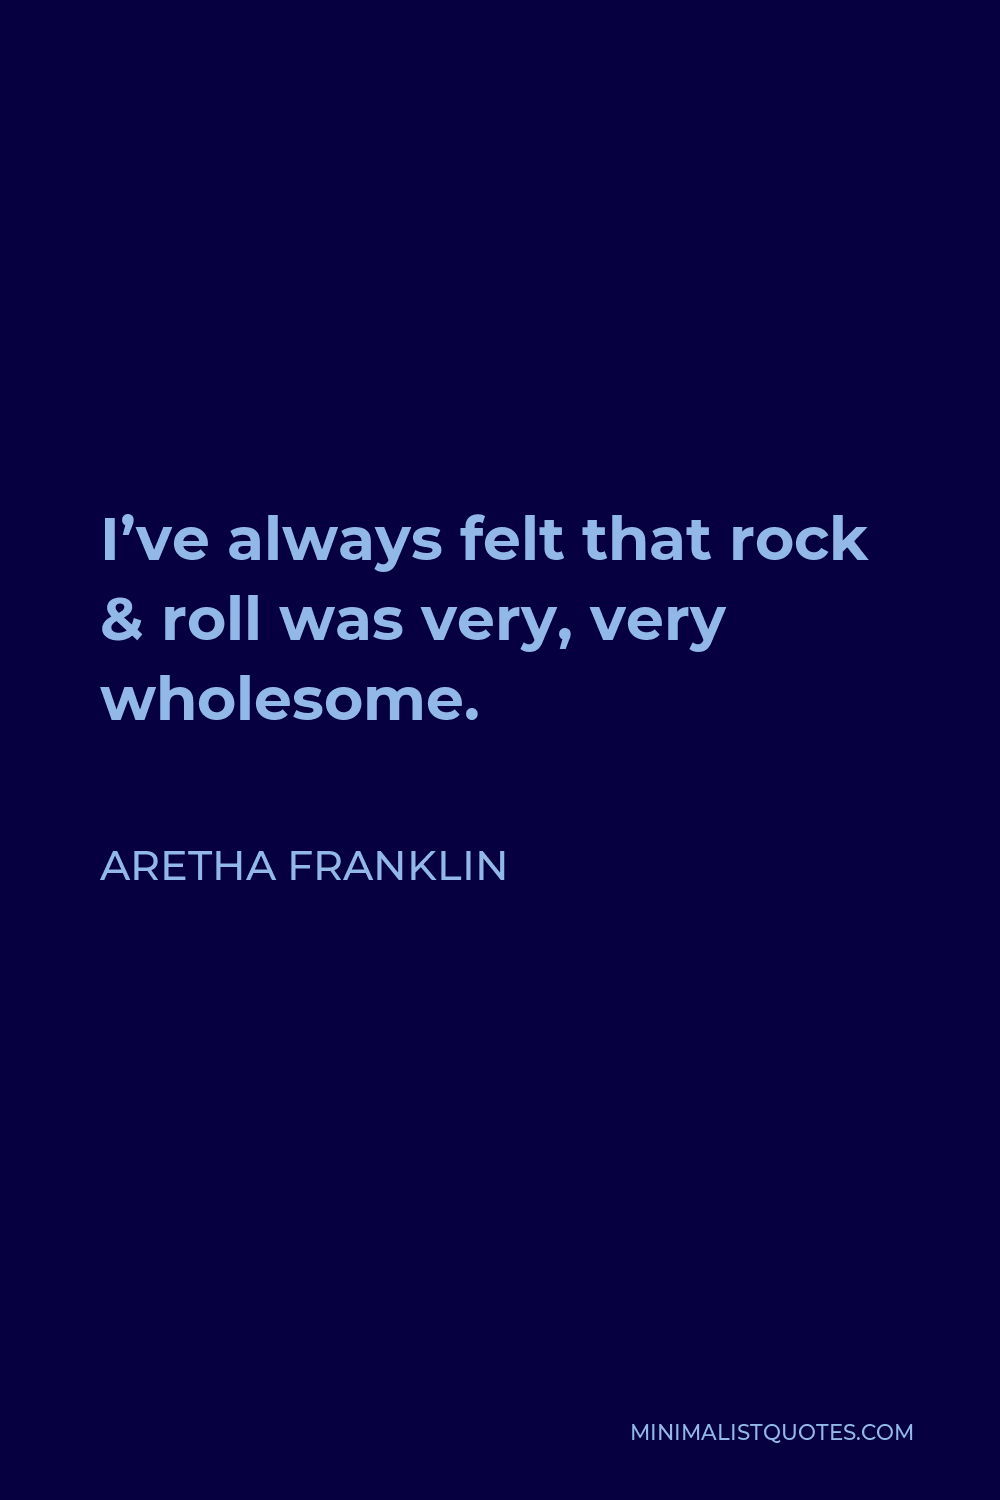 Aretha Franklin Quote - I’ve always felt that rock & roll was very, very wholesome.